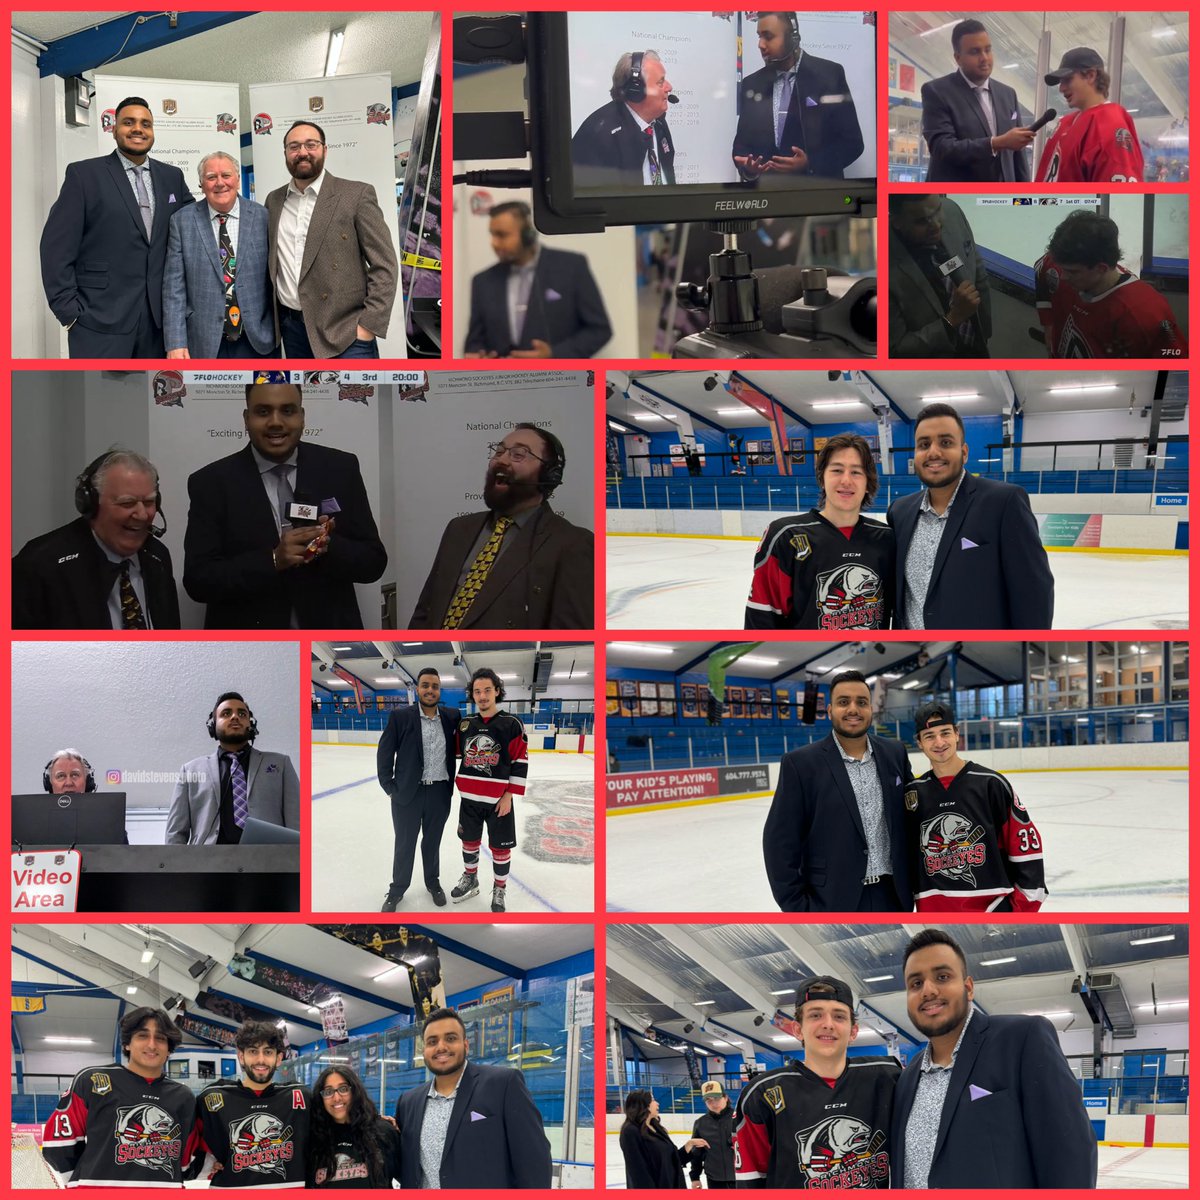 Joining the @RSockeyes midway through the season and being along for the journey to @ThePJHL finals was incredible. 

Shoutout to everyone at the rink—families, players, coaches, staff—for a great season!